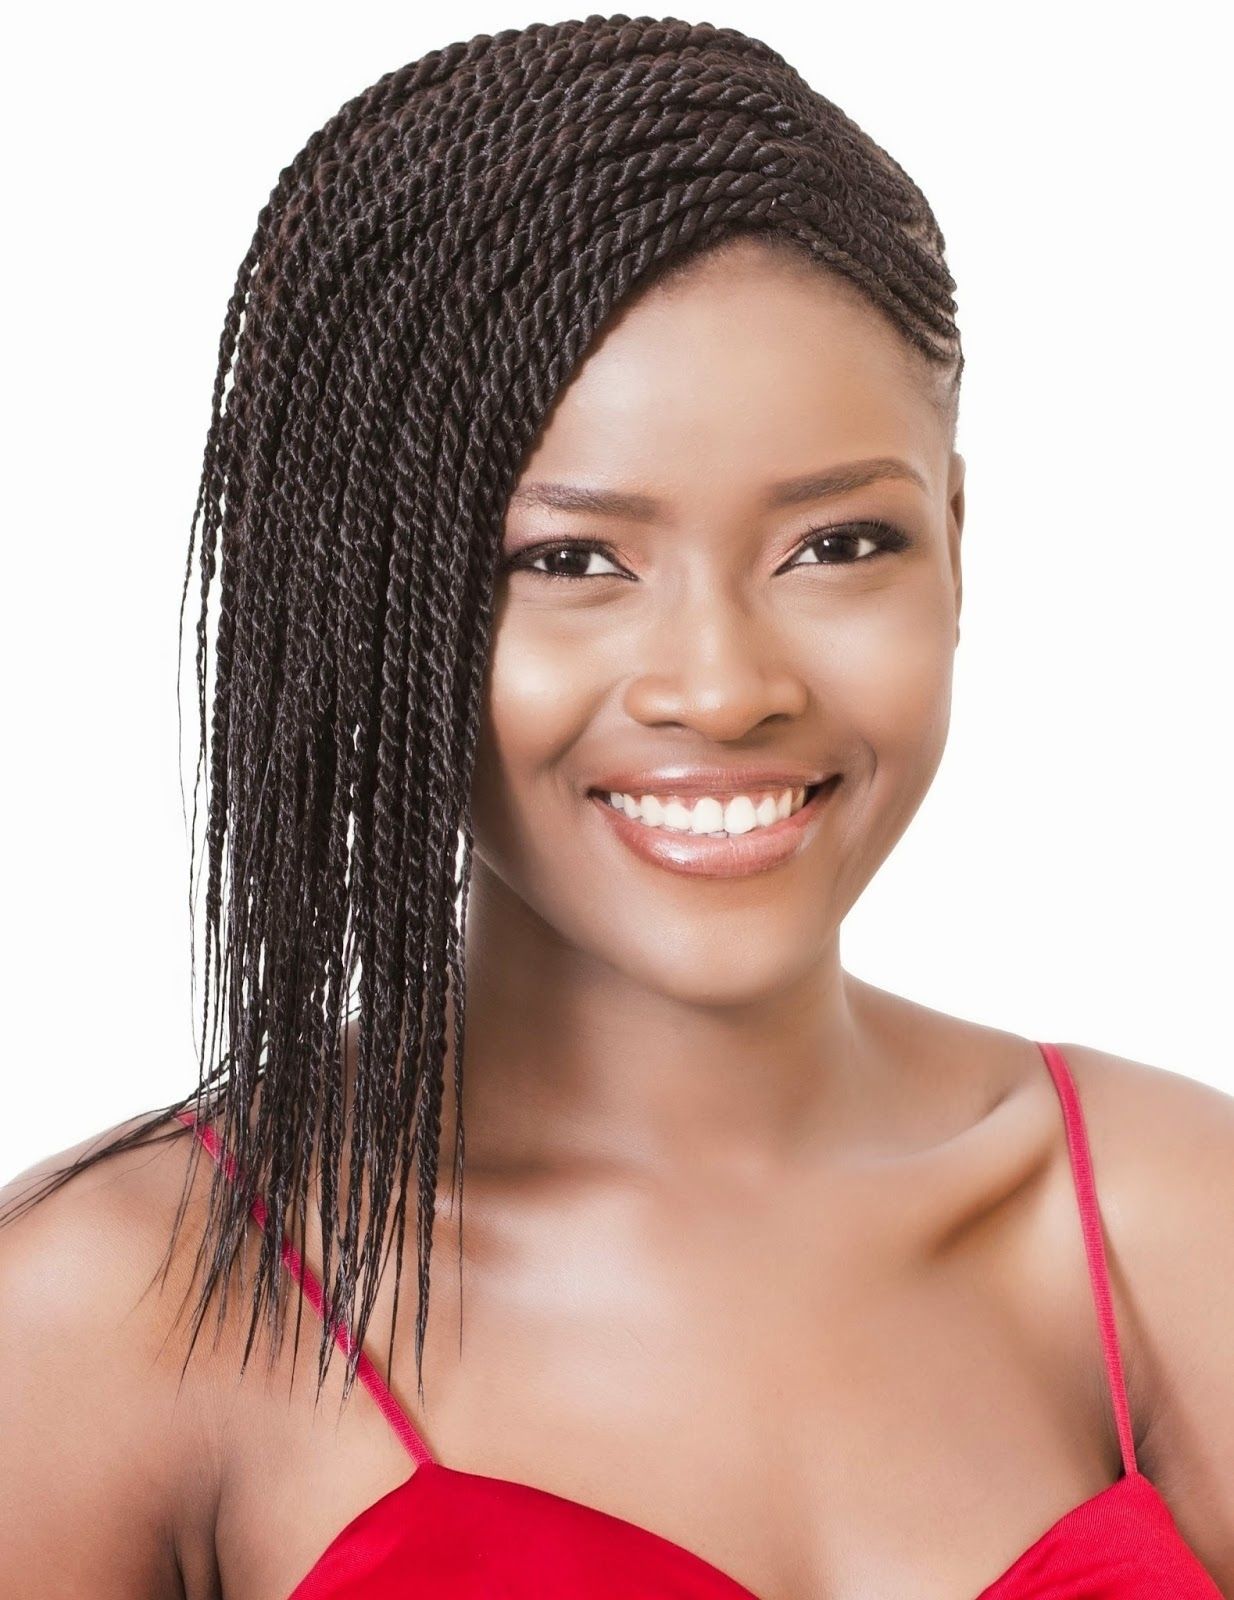 Most Current Cornrows Hairstyles For Small Heads Regarding Cornrow Styles For Round Faces Get The Latest Ghana Braids Hairstyles (View 9 of 15)